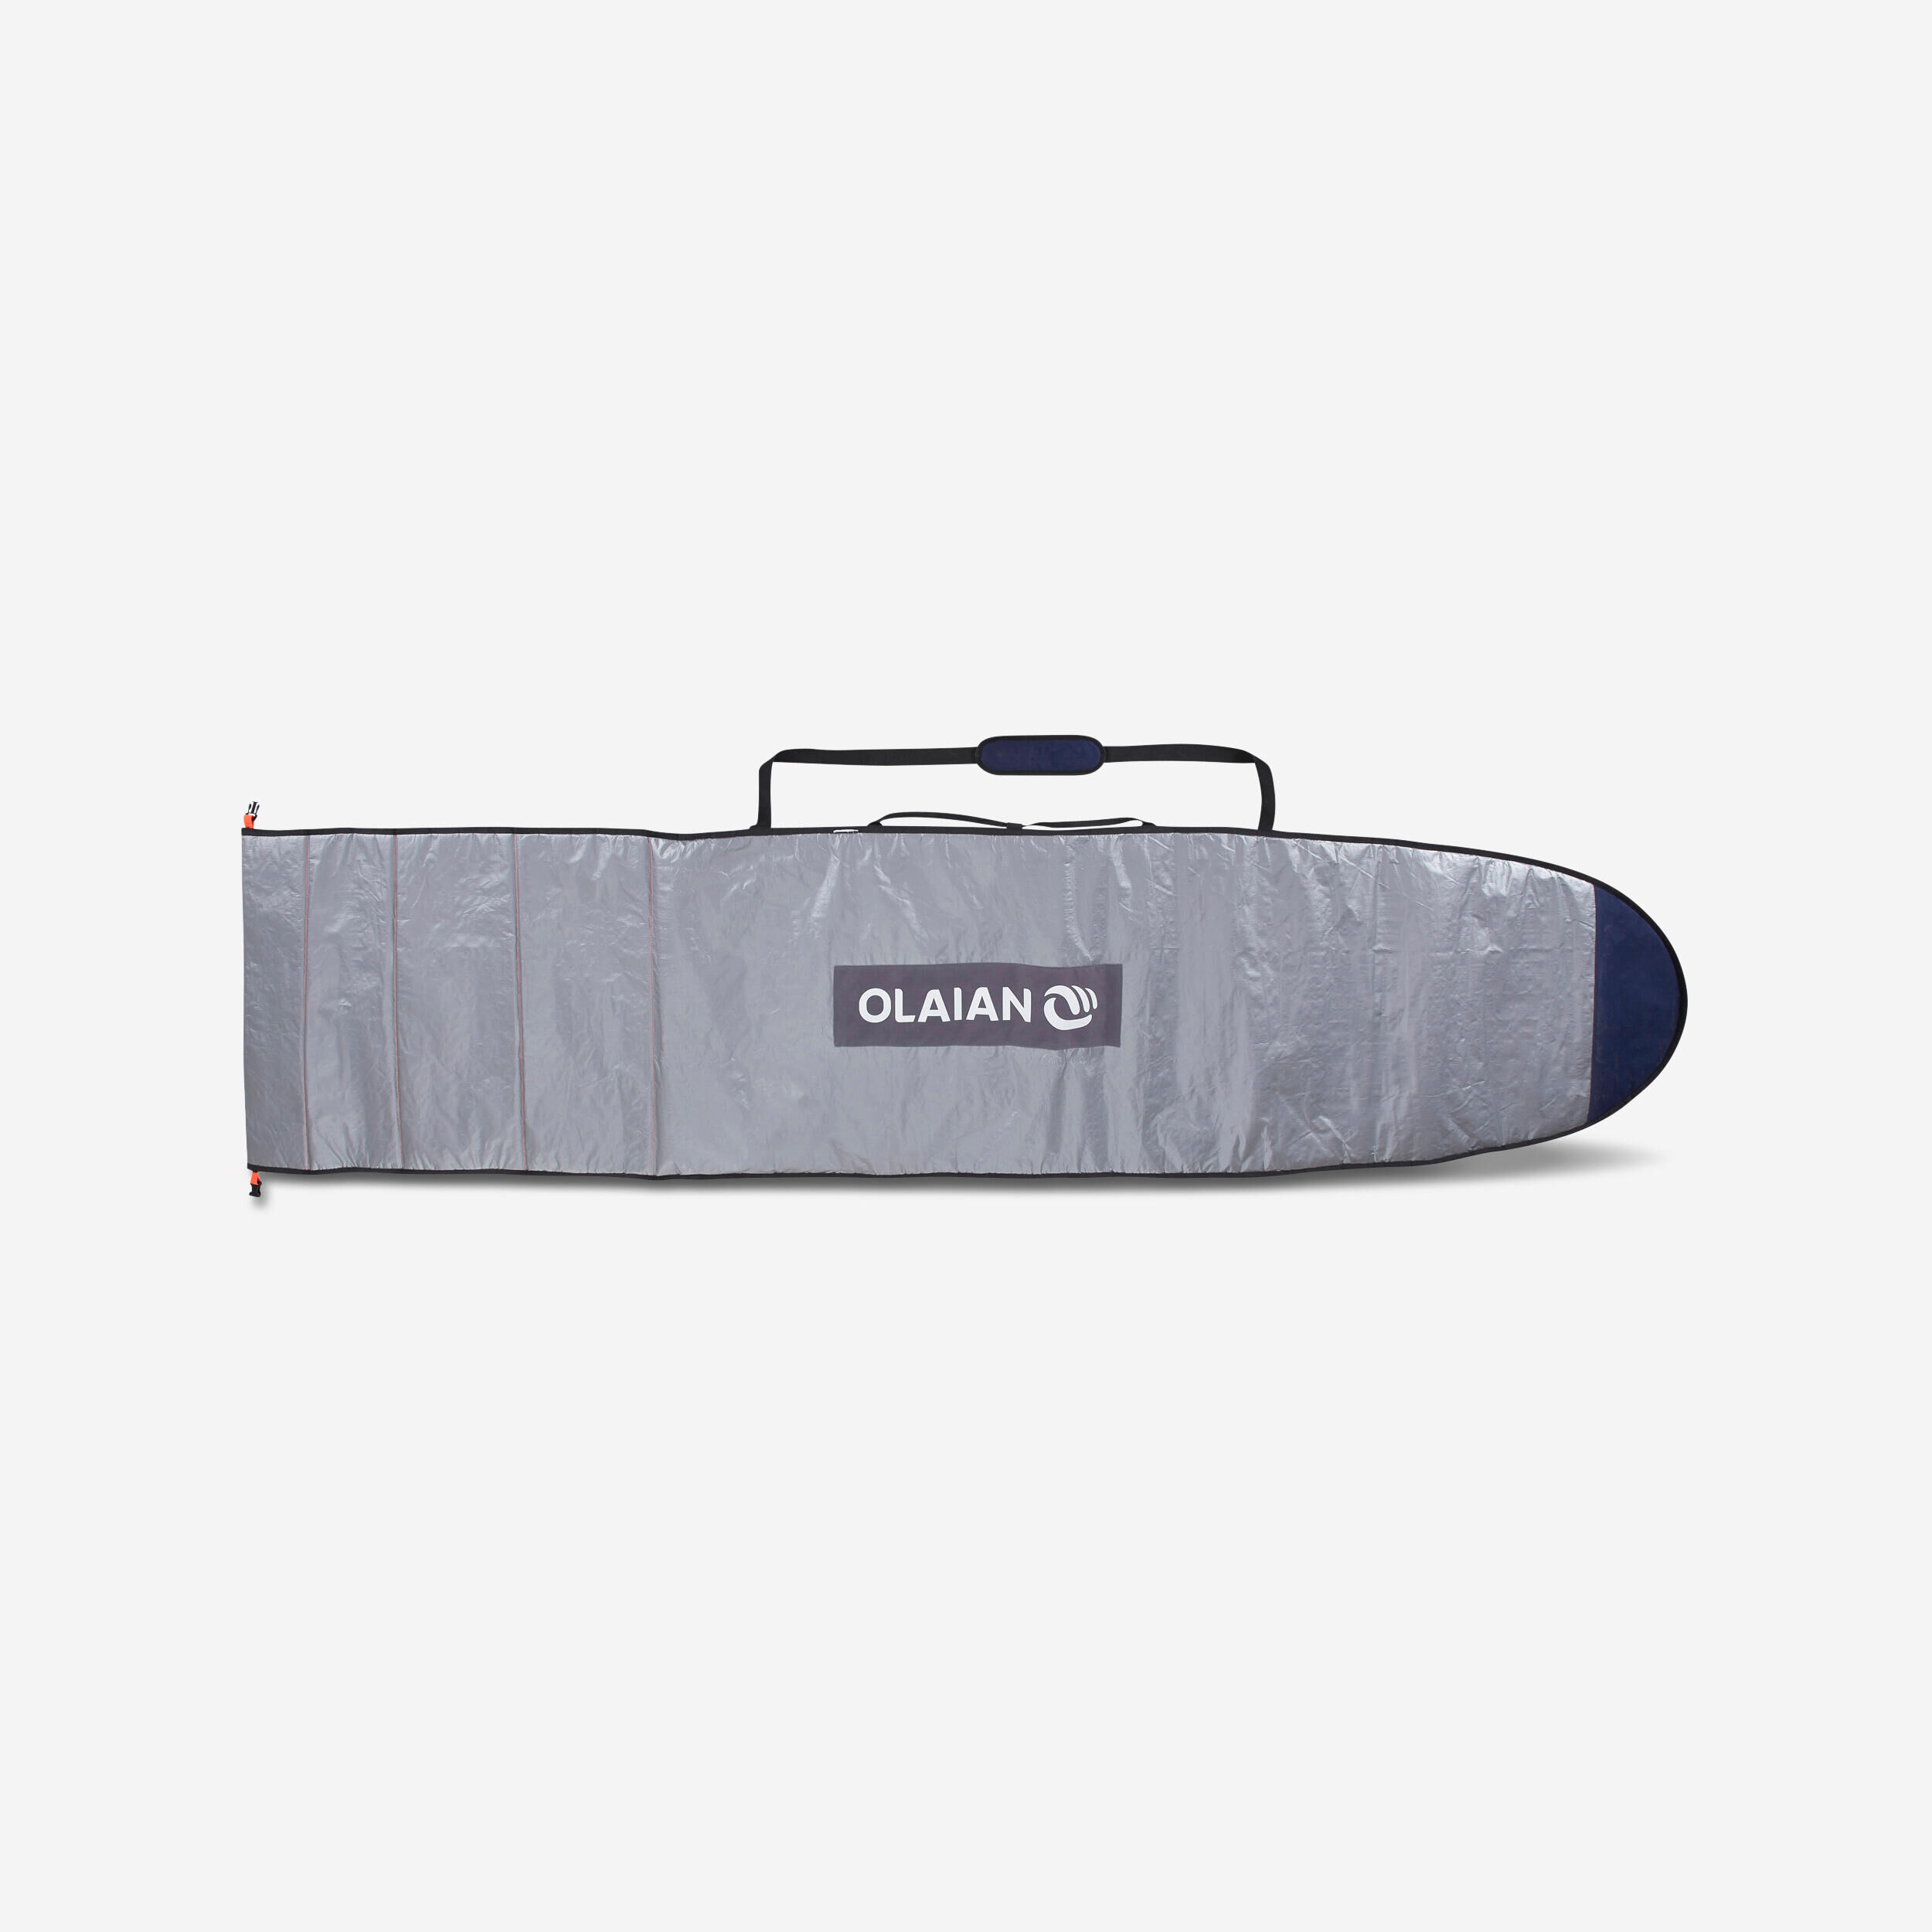 OLAIAN ADJUSTABLE COVER for boards 7'3 to 9'4 (221 to 285 cm)